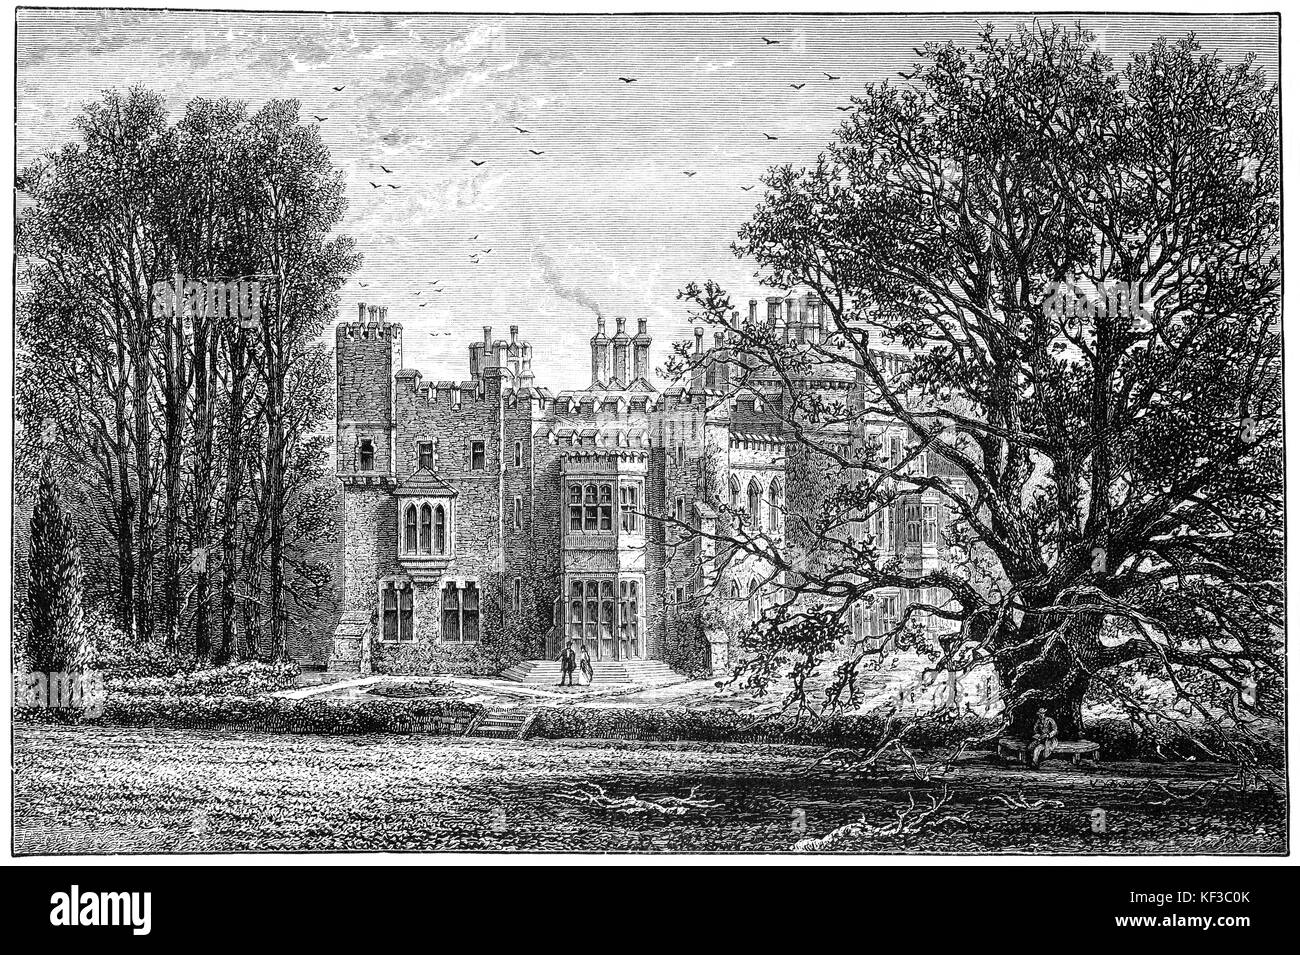 1890:  Hawarden Castle is a house in Hawarden, Flintshire, Wales. It was the estate of the former British Prime Minister William Ewart Gladstone, having previously belonged to the family of his wife, Catherine Glynne. Built in the mid-18th century, it was later enlarged and externally remodelled in the Gothic taste. Stock Photo